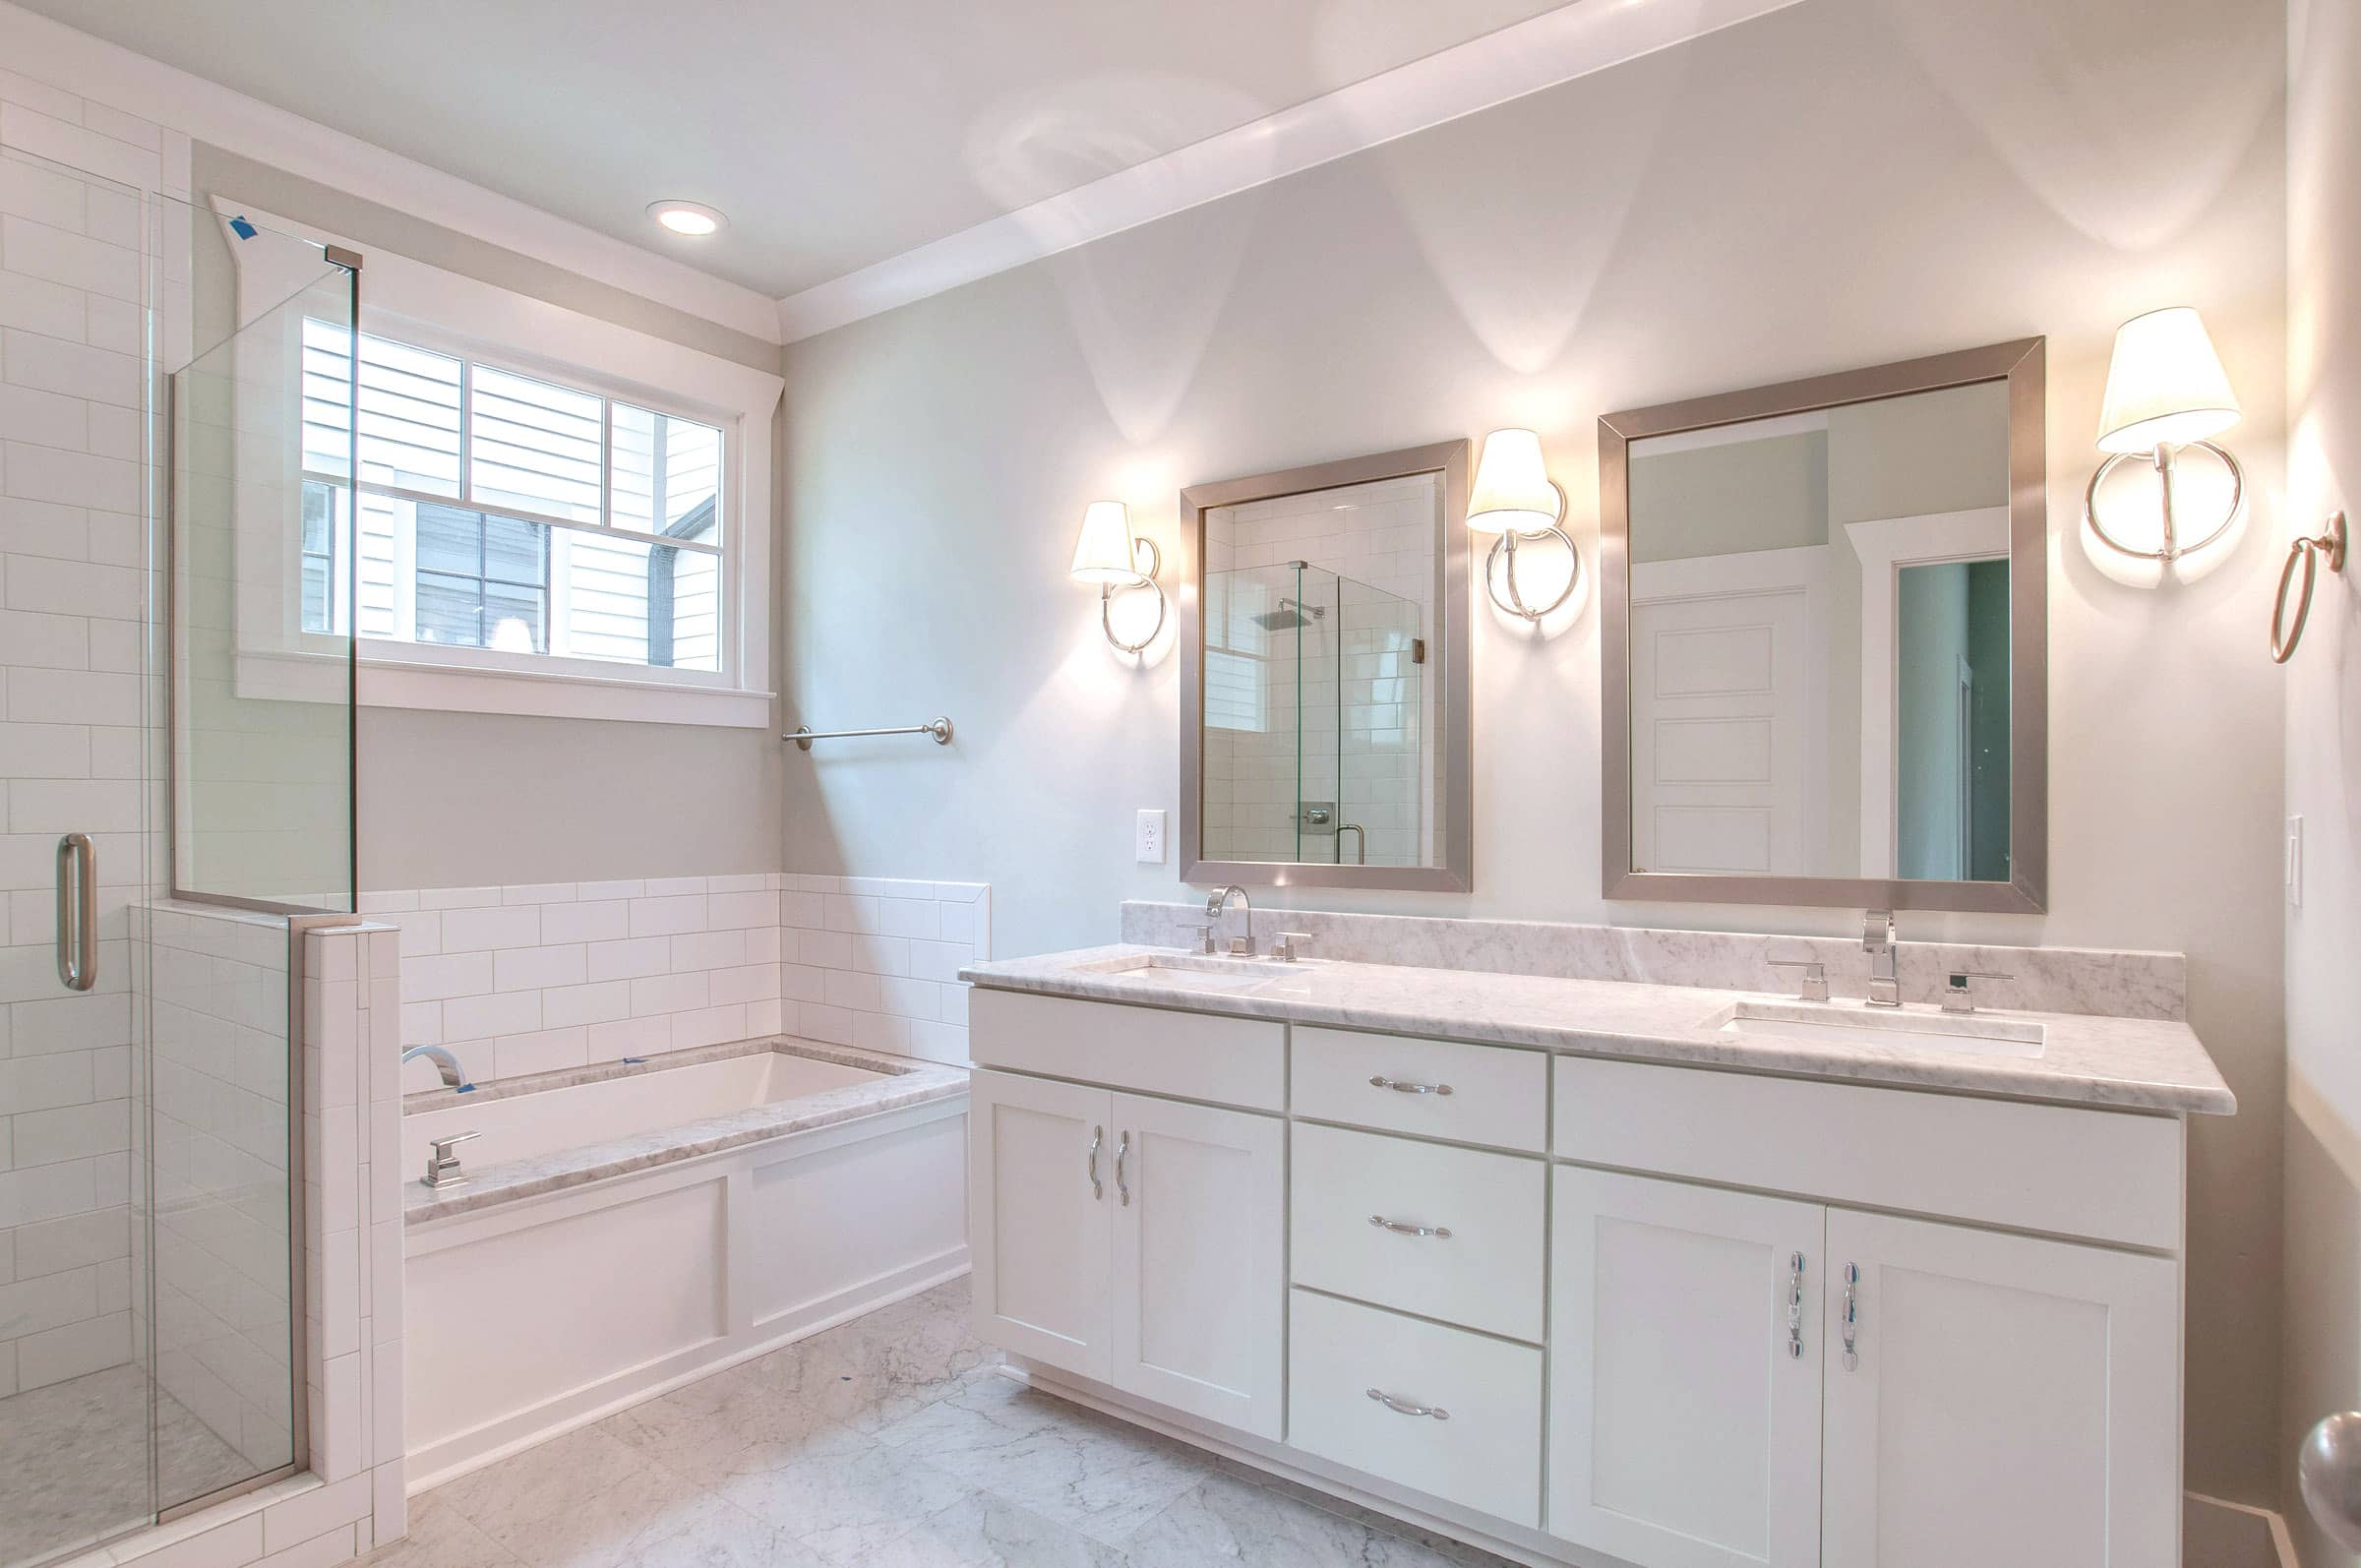 Replace Your Bathroom Vanity When These Situations Arise